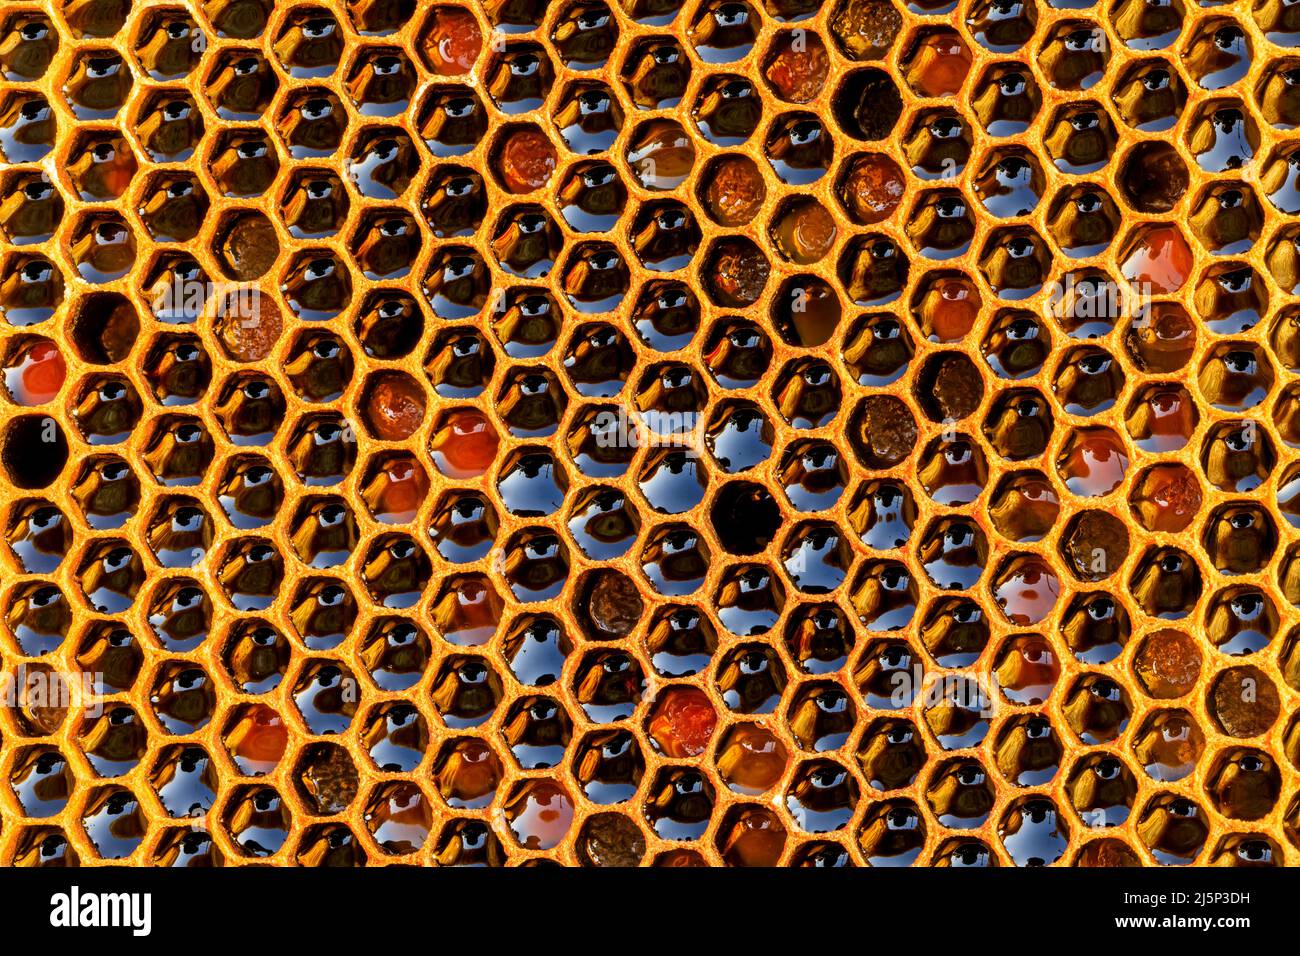 Premium Photo  Bees on honeycomb abstract natural background or texture